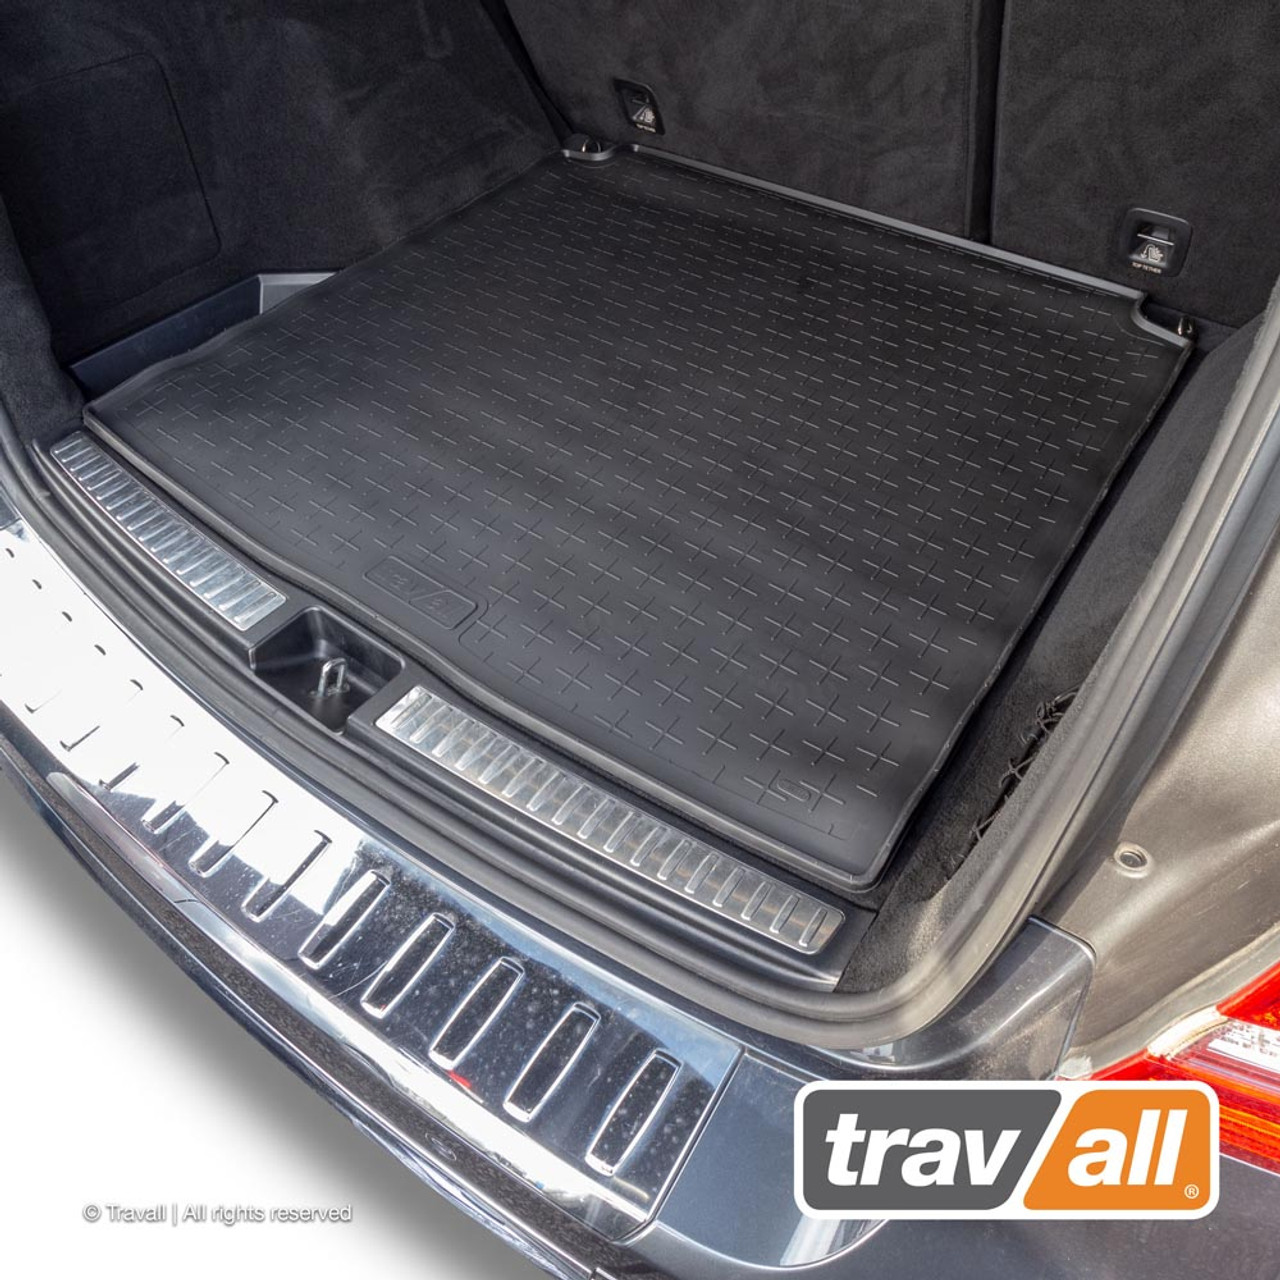 TBM1117 Travall Boot Mat for Mercedes Benz M Class 2011 to 2015 and GLE Class 2015 onwards